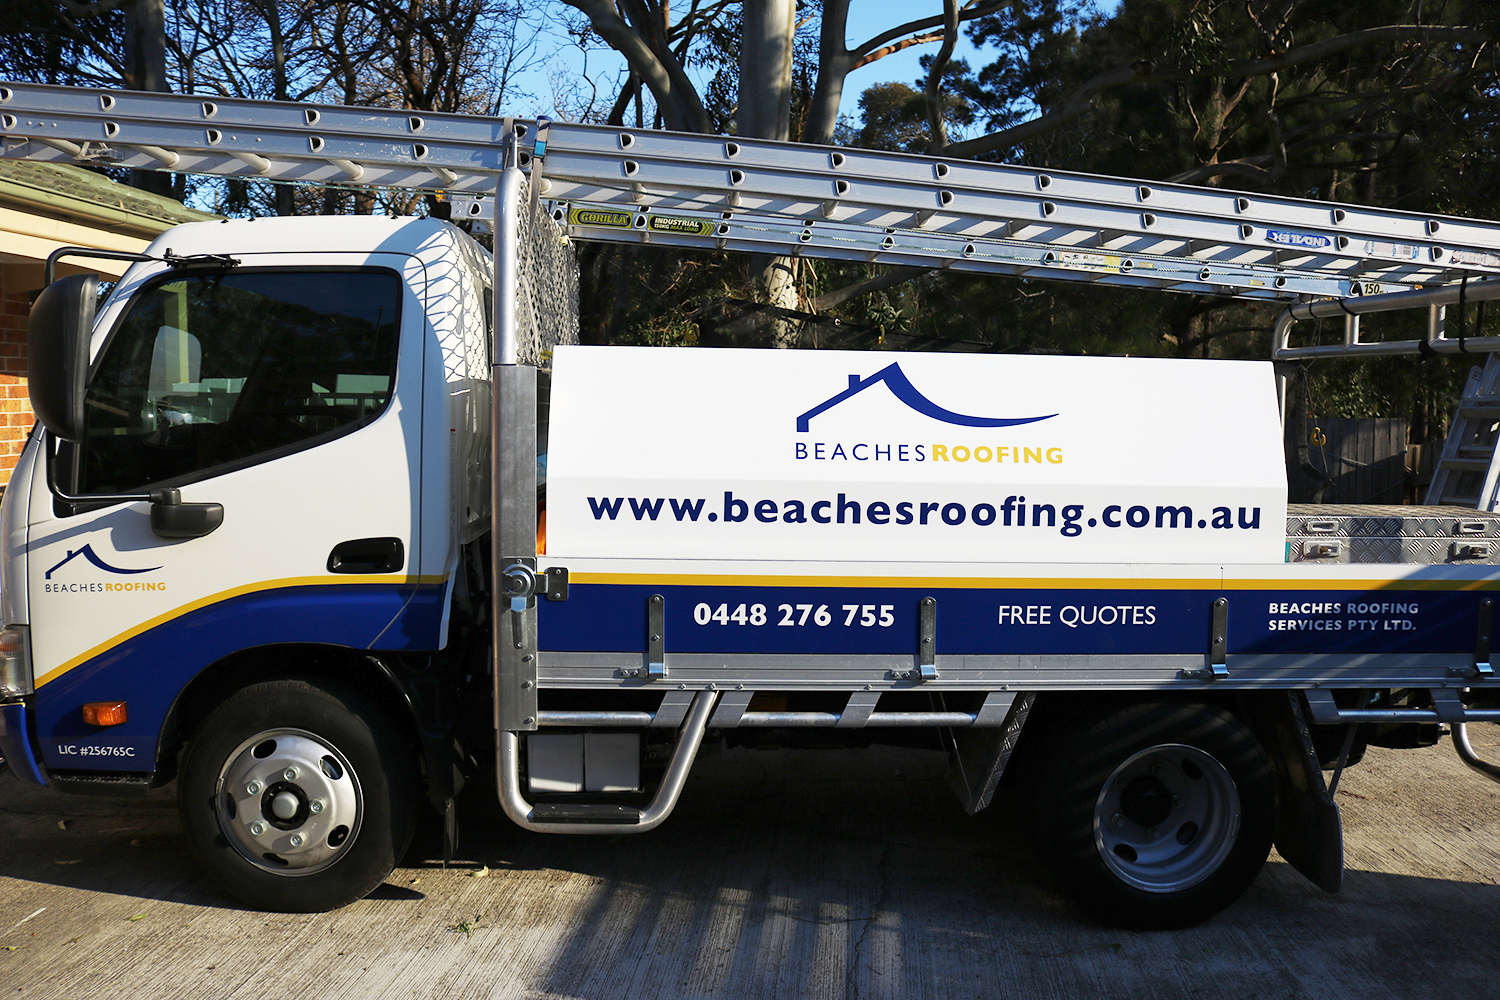 Vehicle Branding for Beaches Roofing